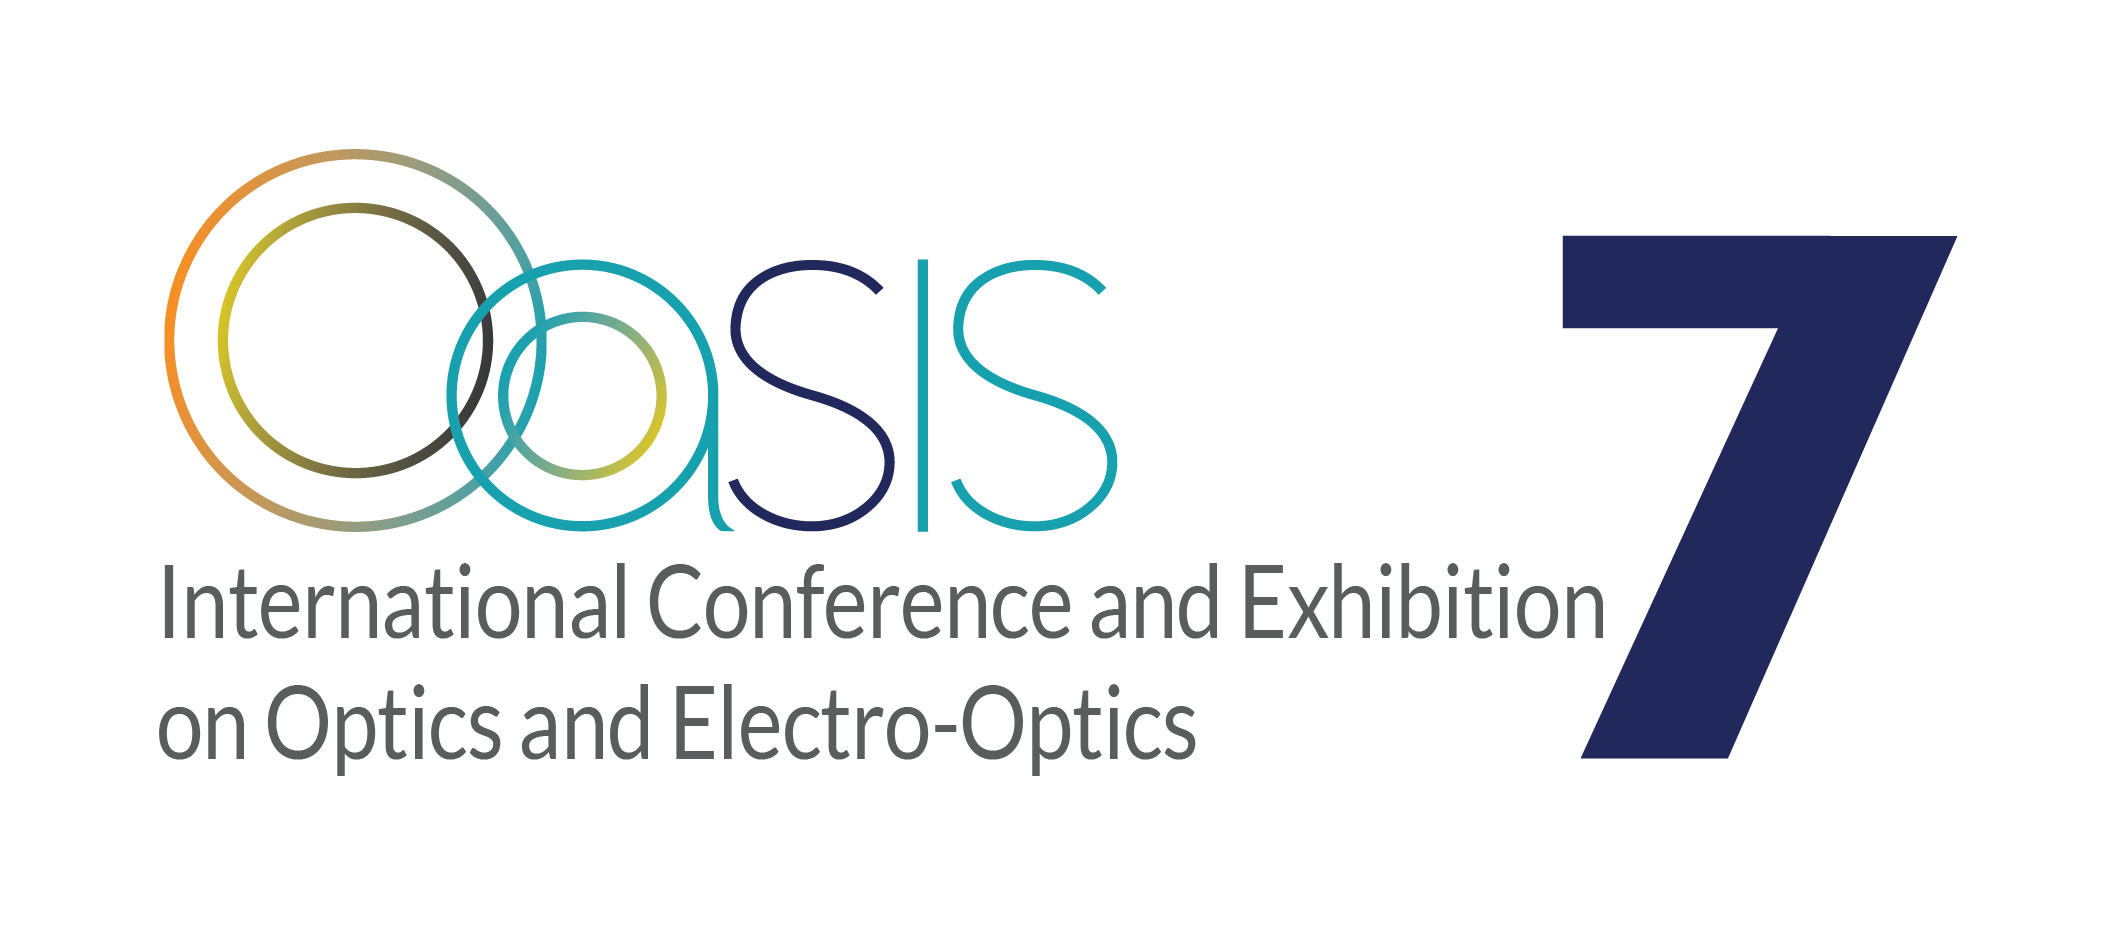 Oasis7 - The 7th International Conference and Exhibition on Optics and Electro Optics